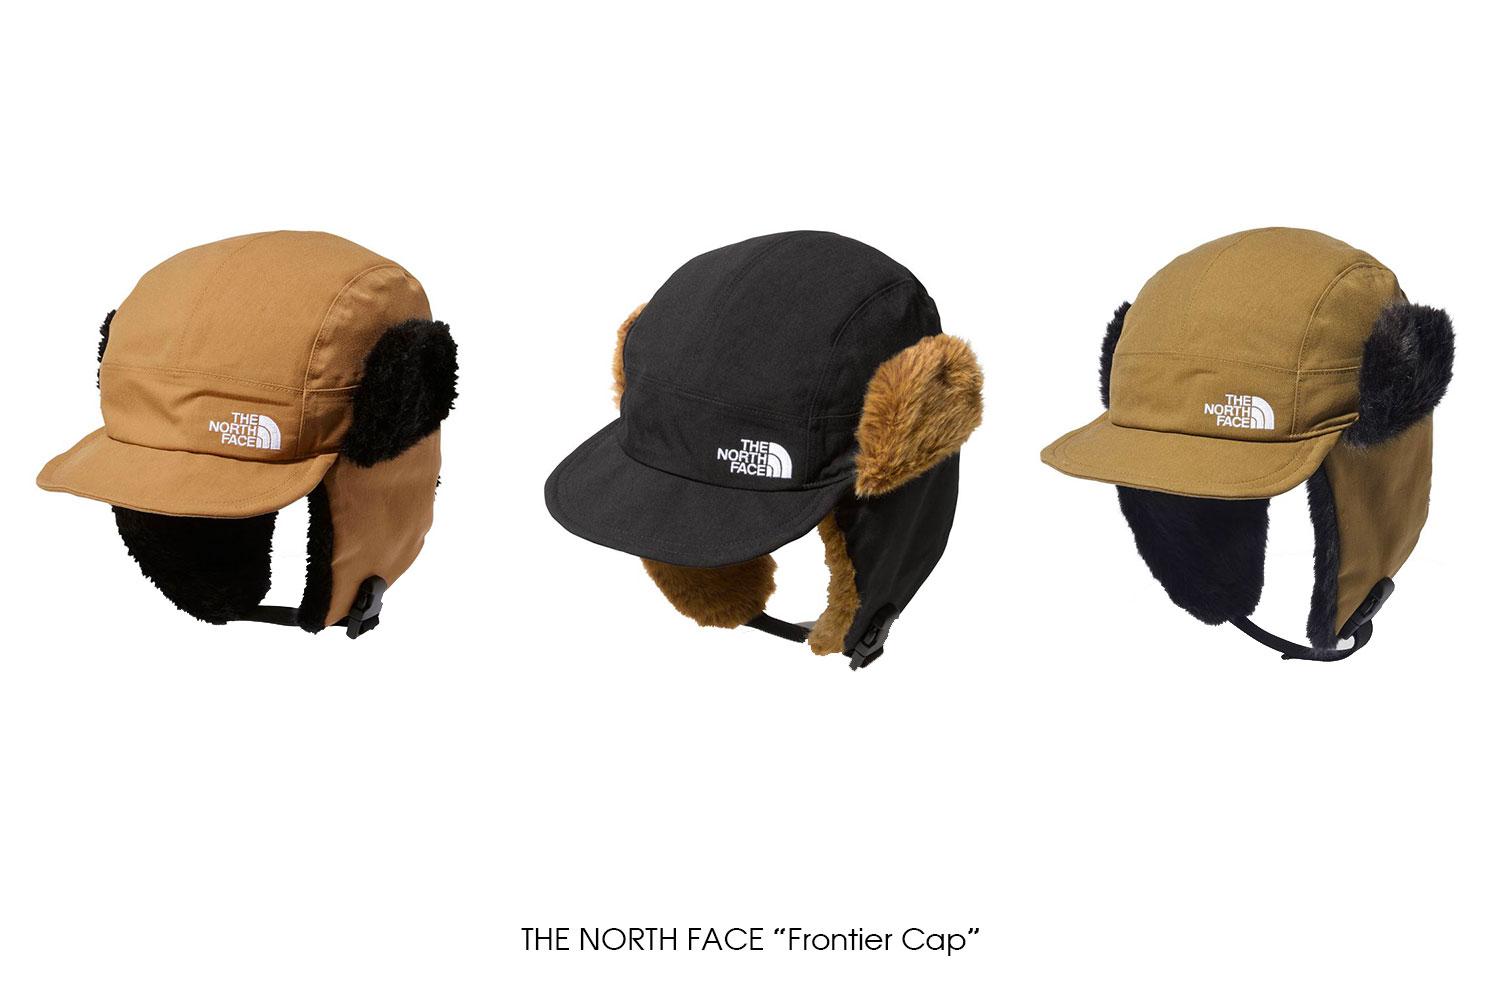 THE NORTH FACE "Frontier Cap"